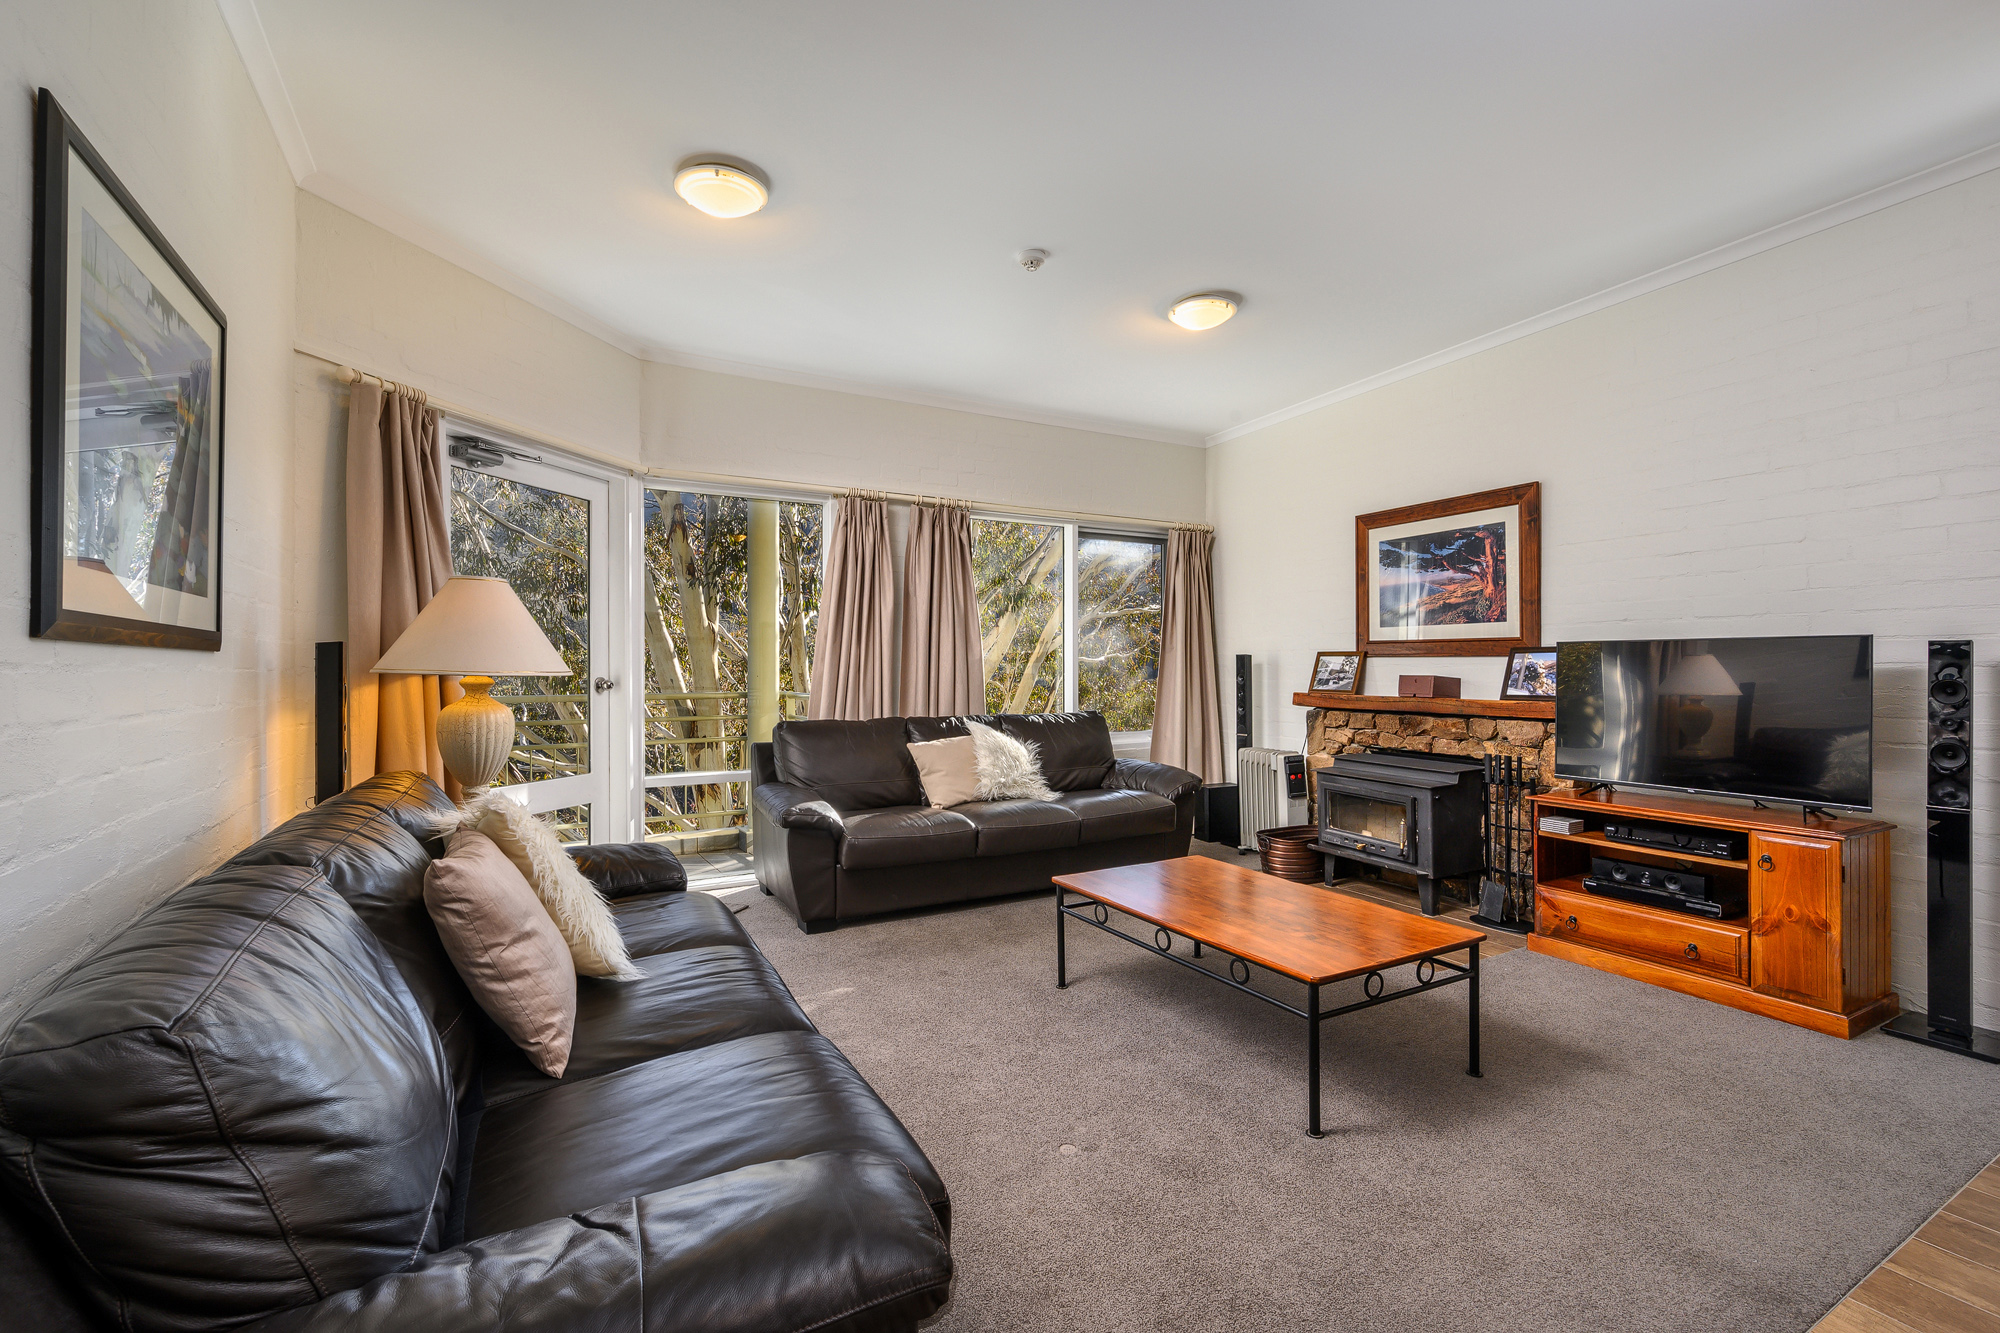 Beautiful Two Bedroom Apartment with some of the best views in Thredbo – $795,000